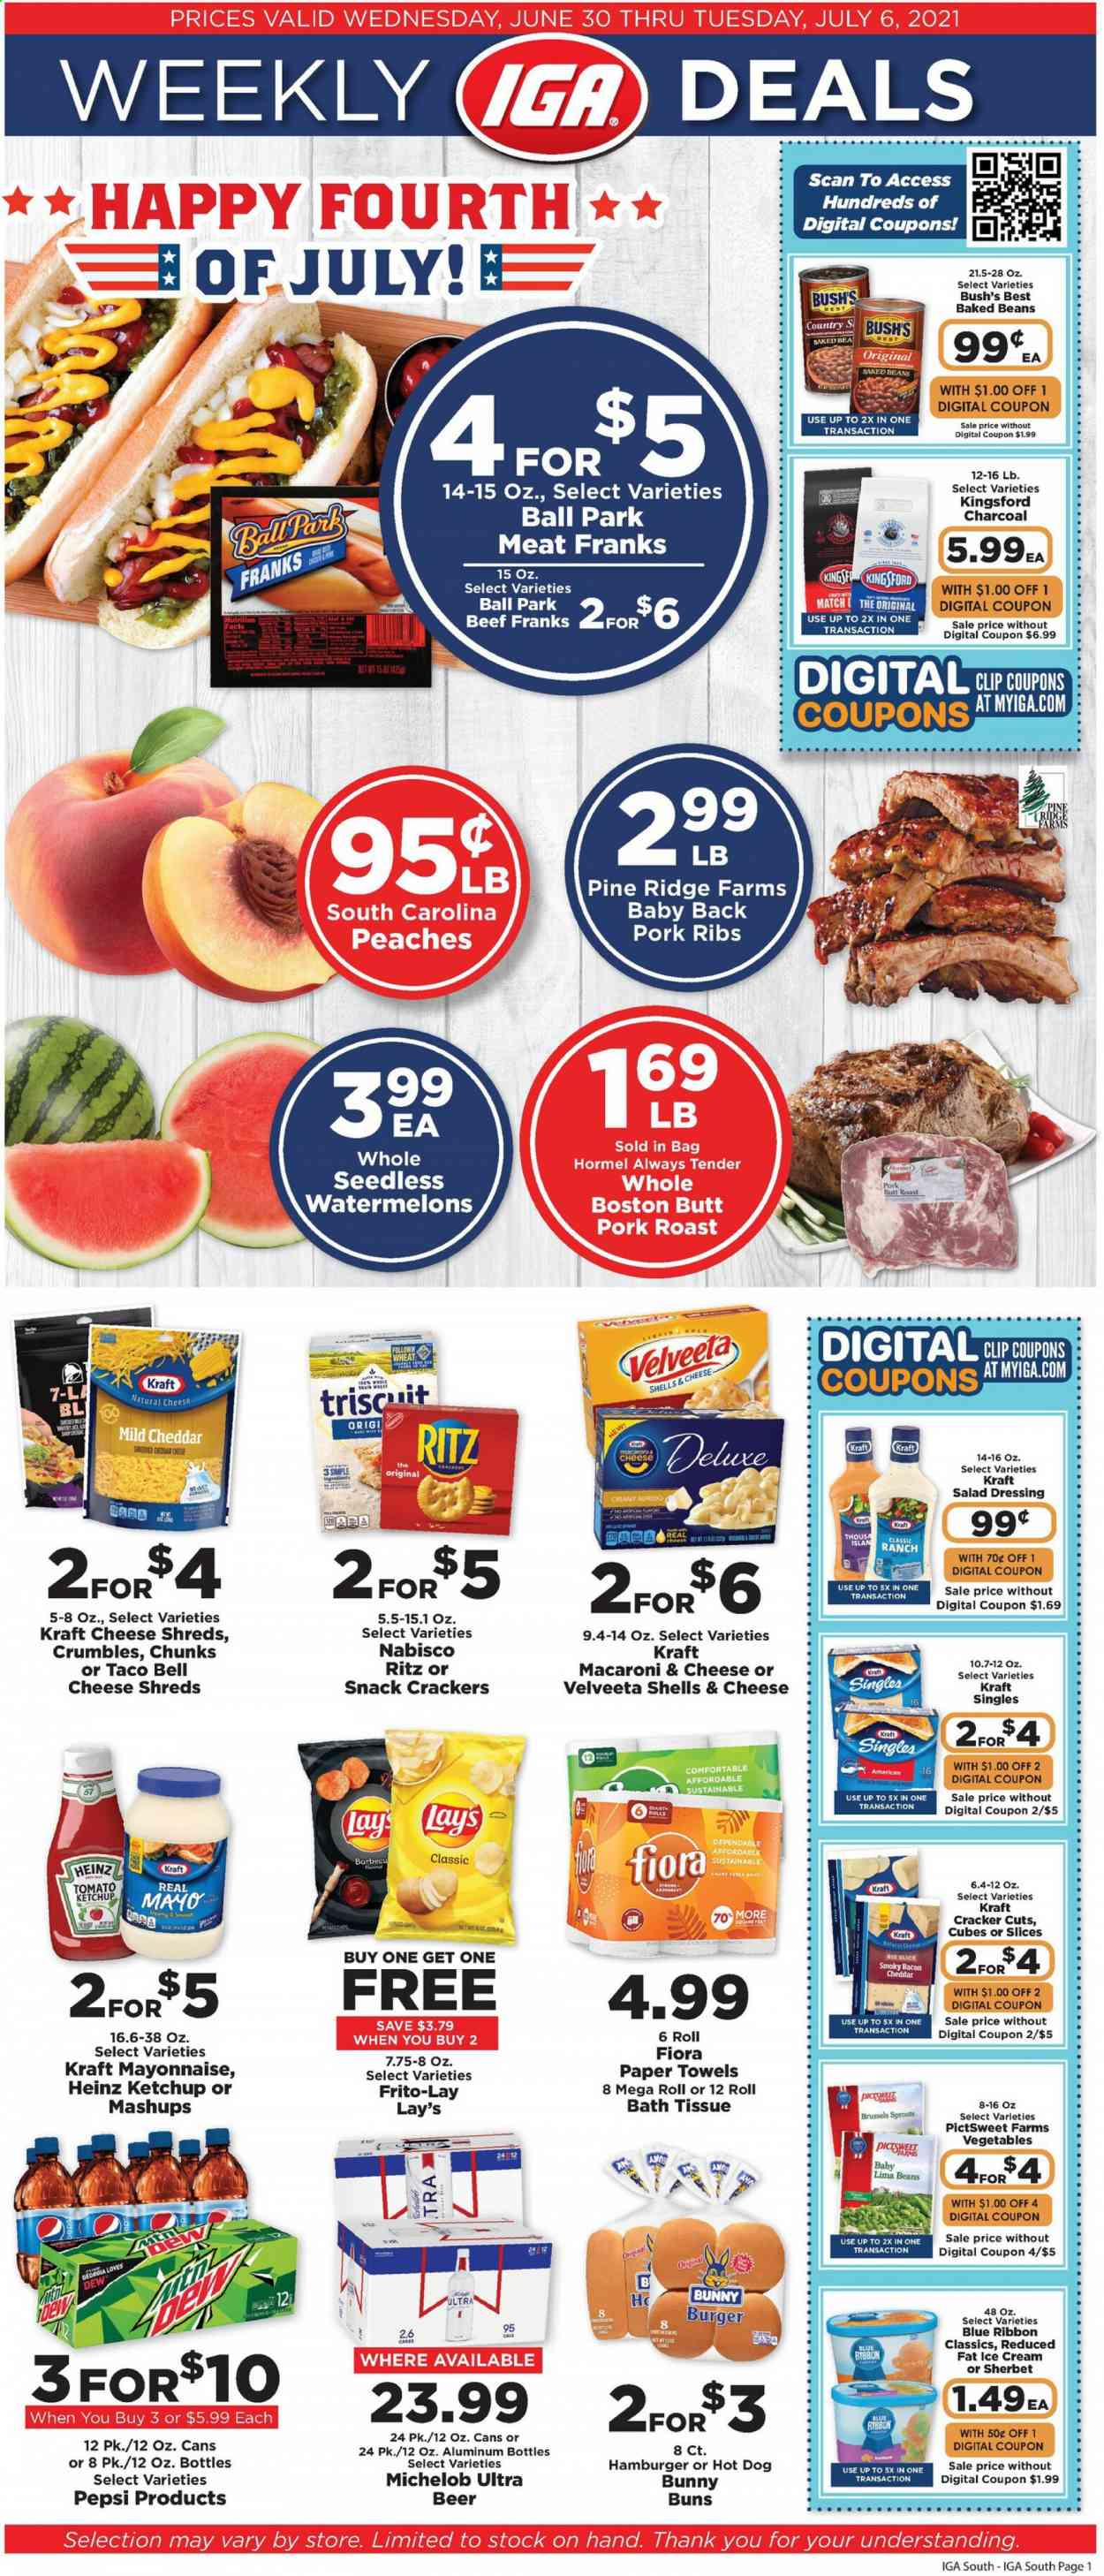 thumbnail - IGA Flyer - 06/30/2021 - 07/06/2021 - Sales products - Michelob, buns, beans, brussel sprouts, macaroni & cheese, hot dog, hamburger, Kraft®, Hormel, bacon, mild cheddar, sandwich slices, Kraft Singles, ice cream, sherbet, Blue Ribbon, lima beans, crackers, RITZ, Lay’s, Frito-Lay, Heinz, baked beans, salad dressing, ketchup, dressing, Pepsi, beer, pork meat, pork ribs, pork roast, pork back ribs, bath tissue, kitchen towels, paper towels, cup, peaches. Page 1.